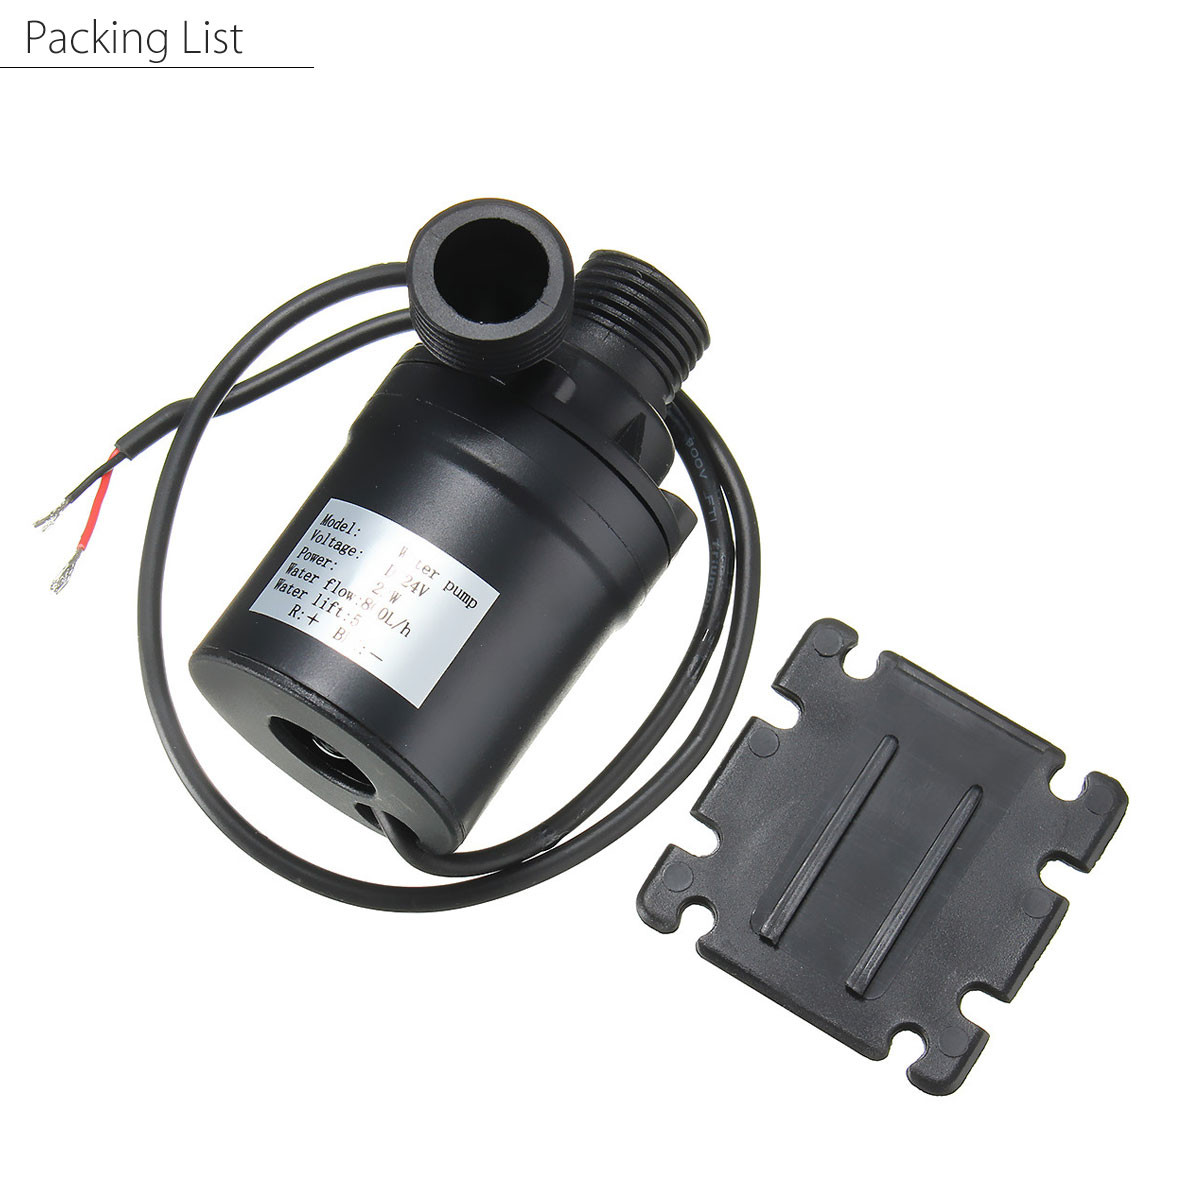 DC-24V-800LH-19W-5m-Lift-Mini-Quiet-Brushless-Motor-Submersible-Water-Pump-With-4mm-Threaded-Port-1100573-9